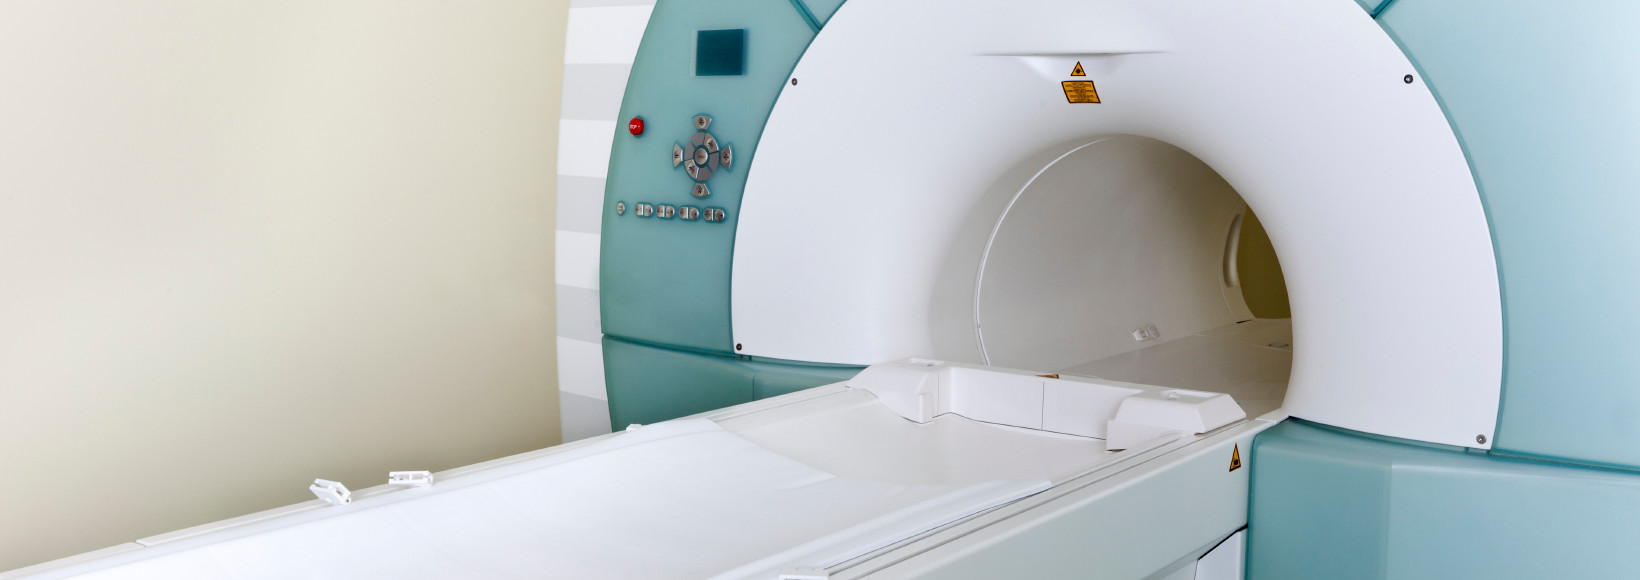 Cancer Radiotherapy Treatment